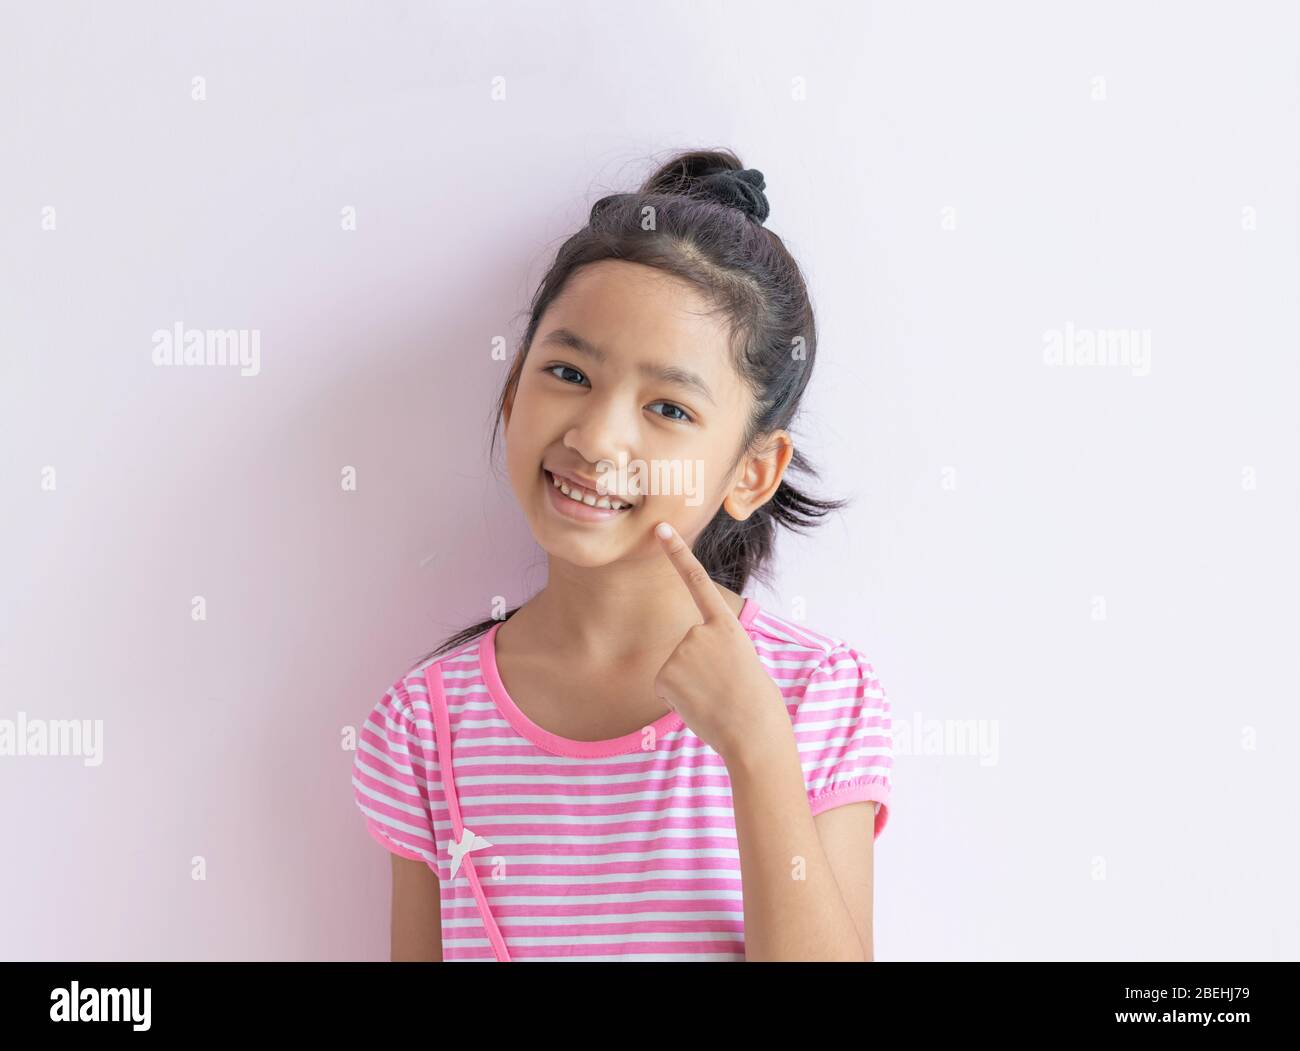 Portrait of an Asian little girl wearing a pink and white striped dress. The child with black hair is smiling and pointing to her face. Stock Photo